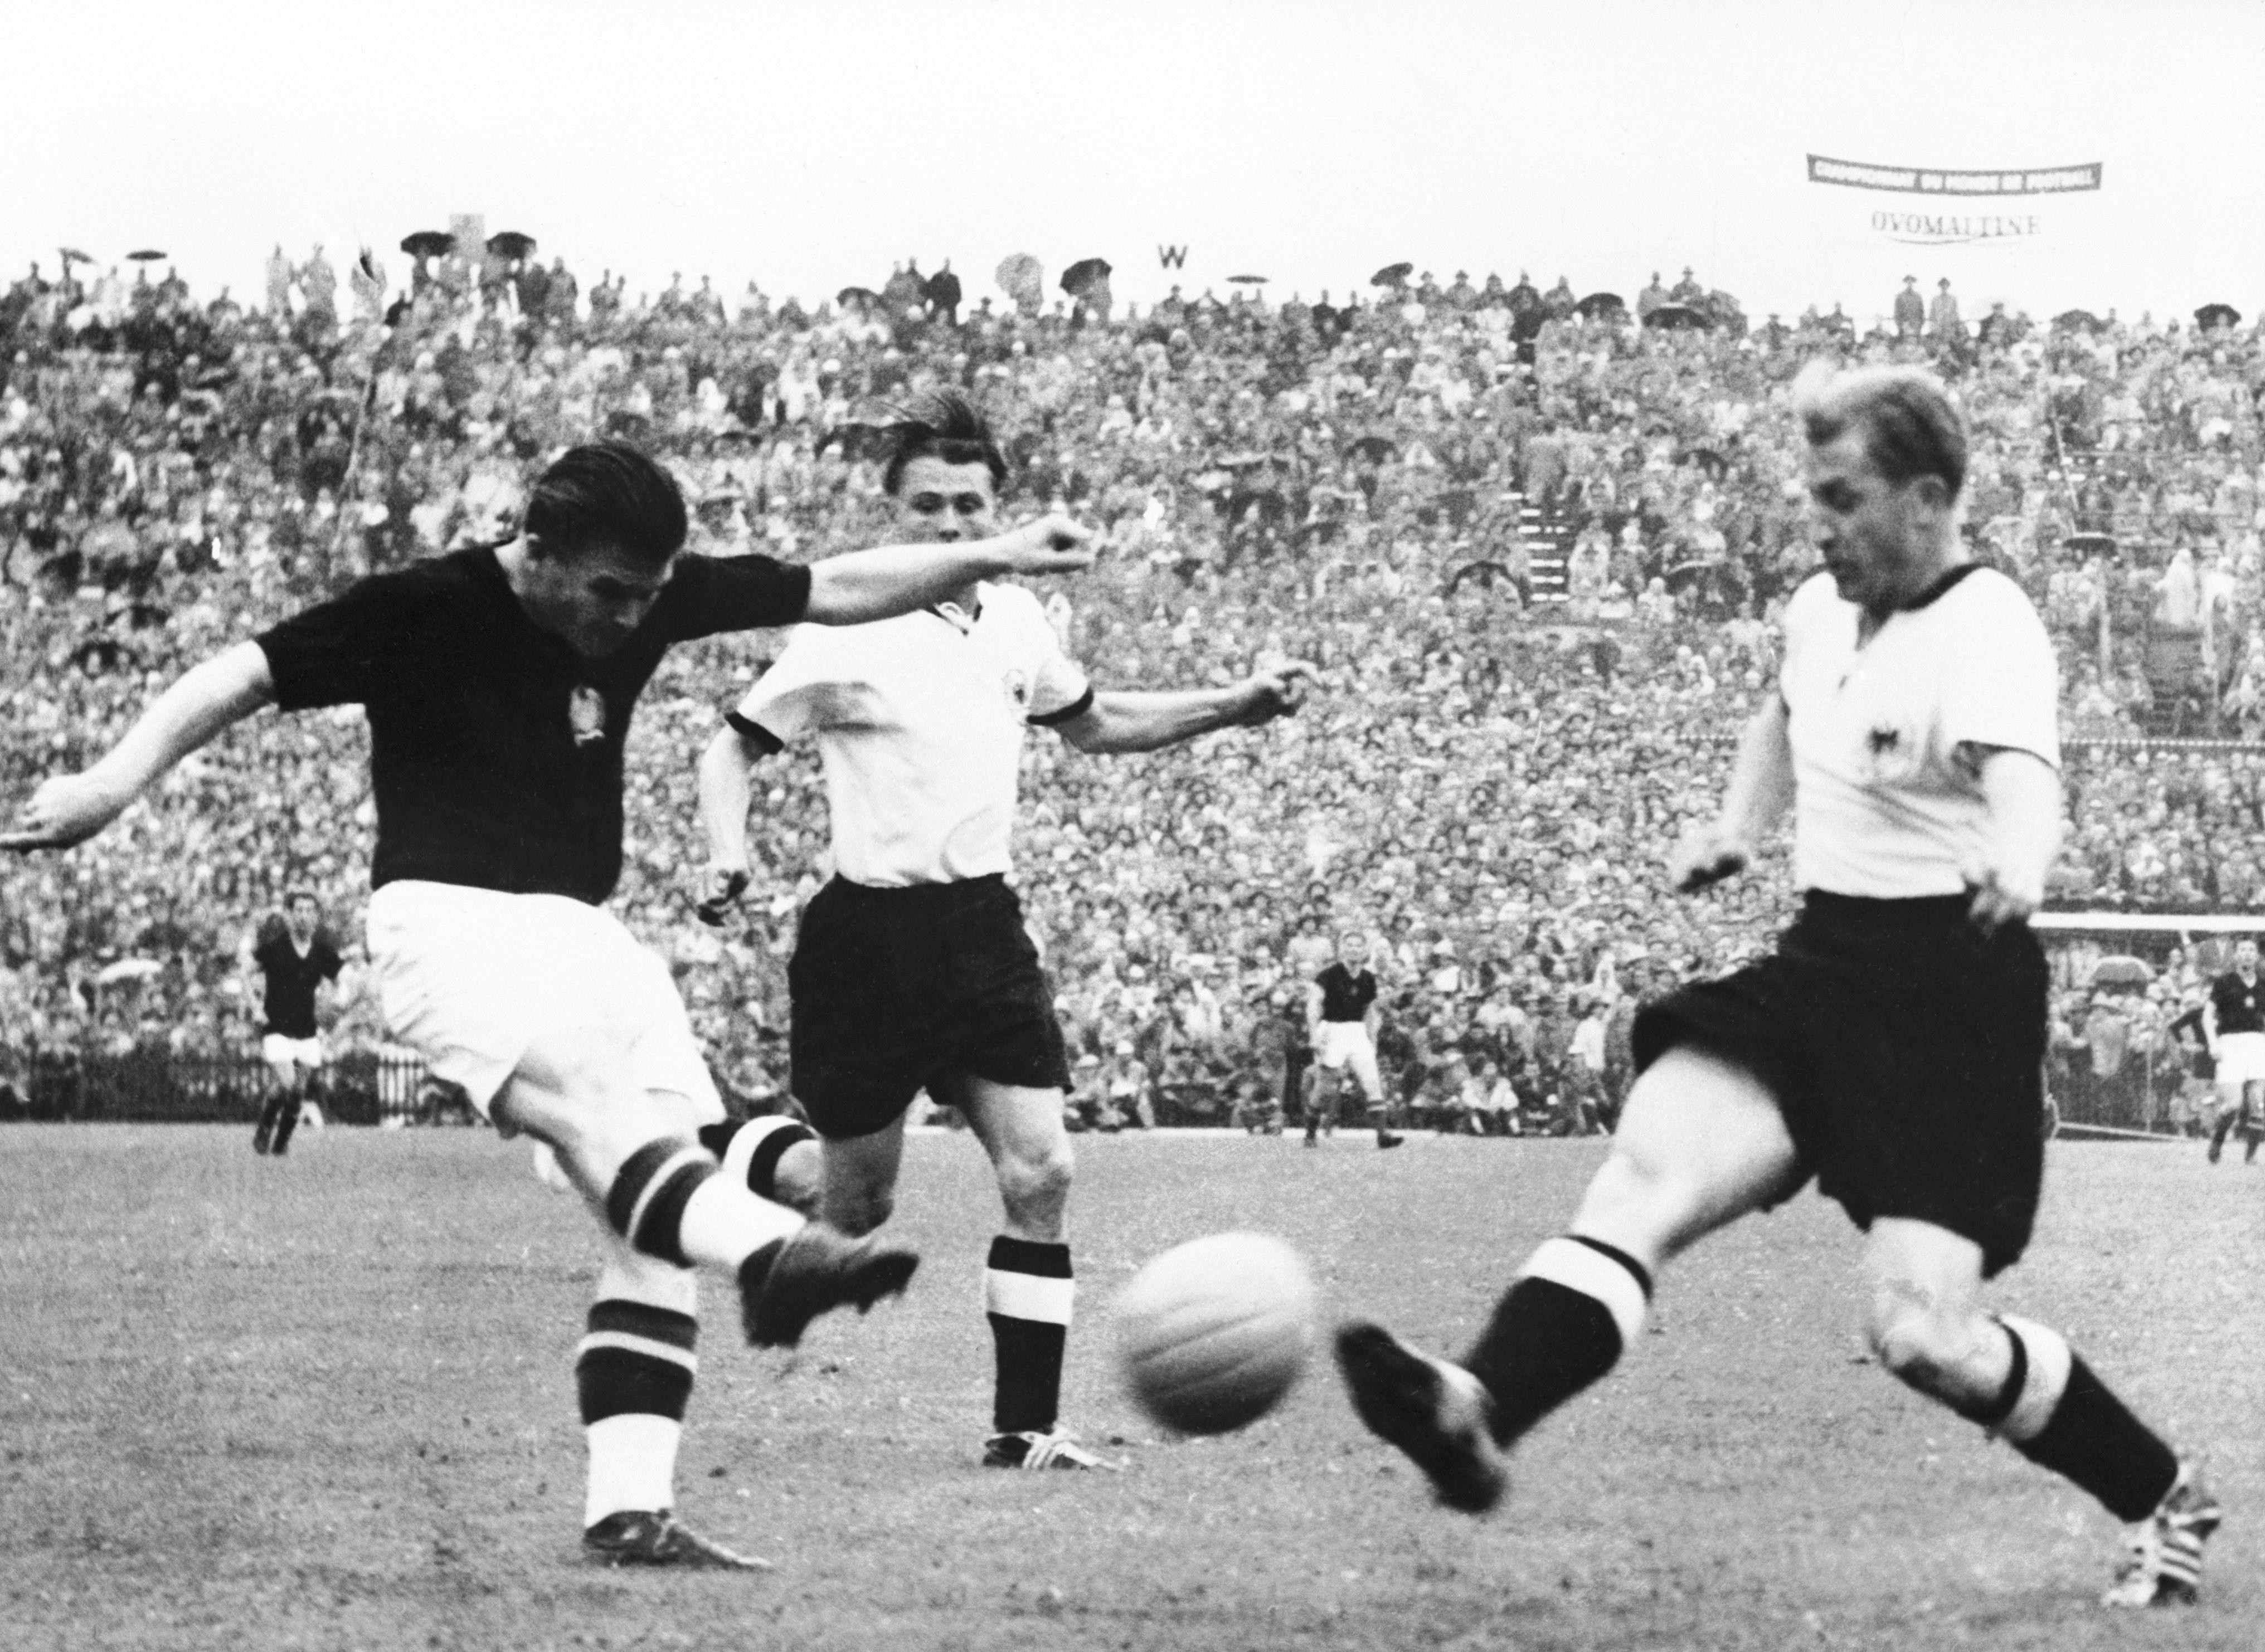 Hungary and West Germany contest the 1954 World Cup final